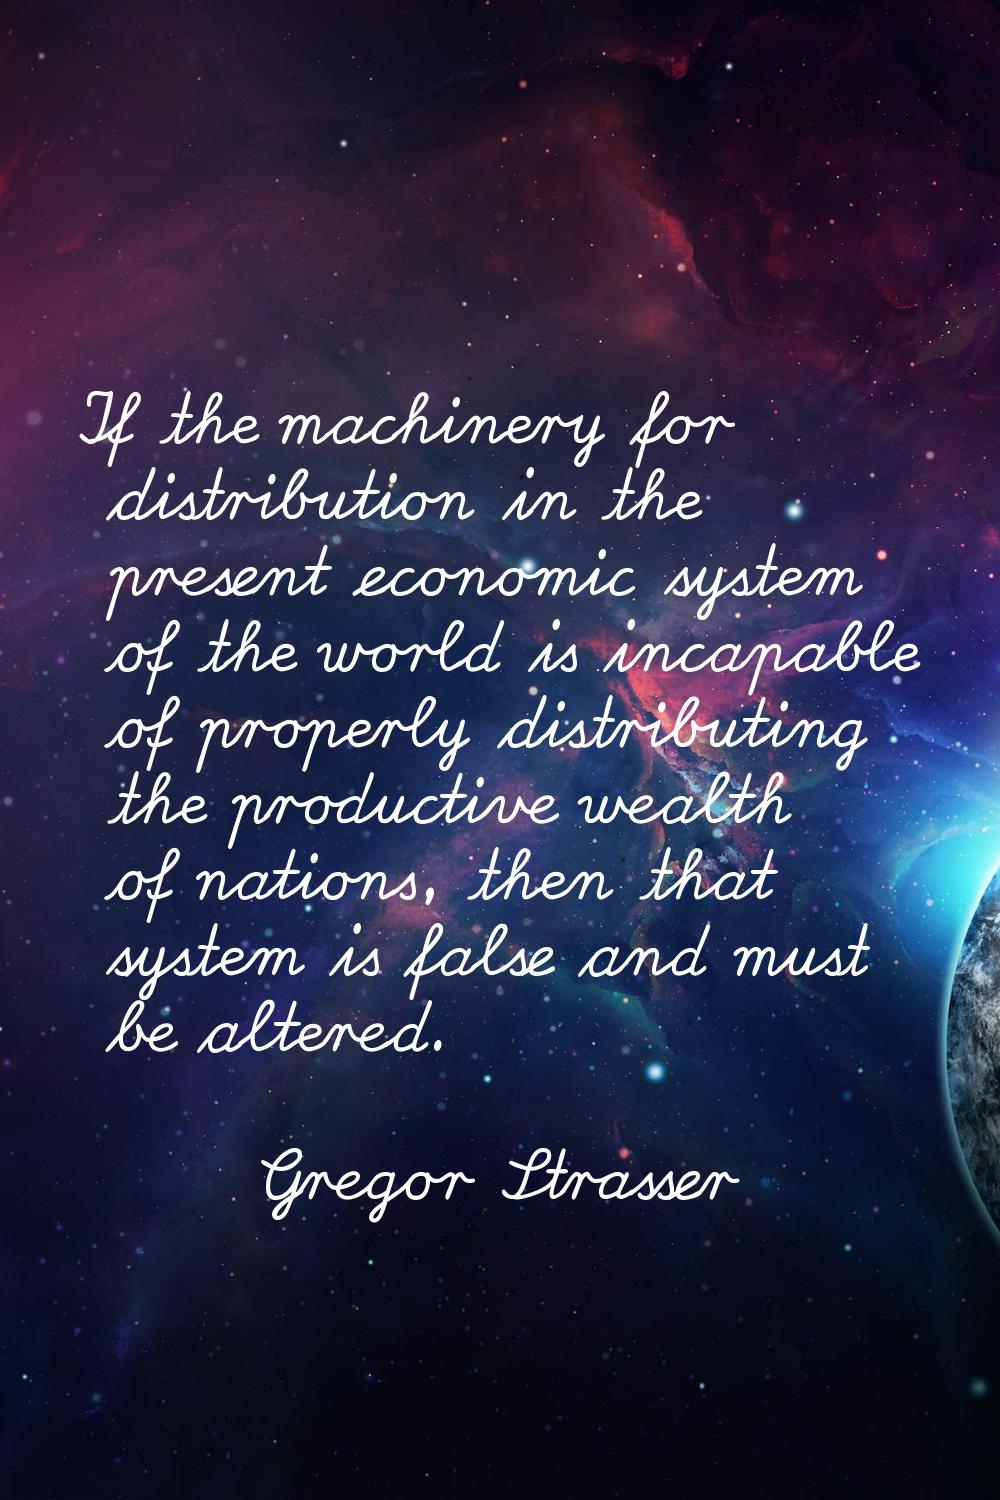 If the machinery for distribution in the present economic system of the world is incapable of prope